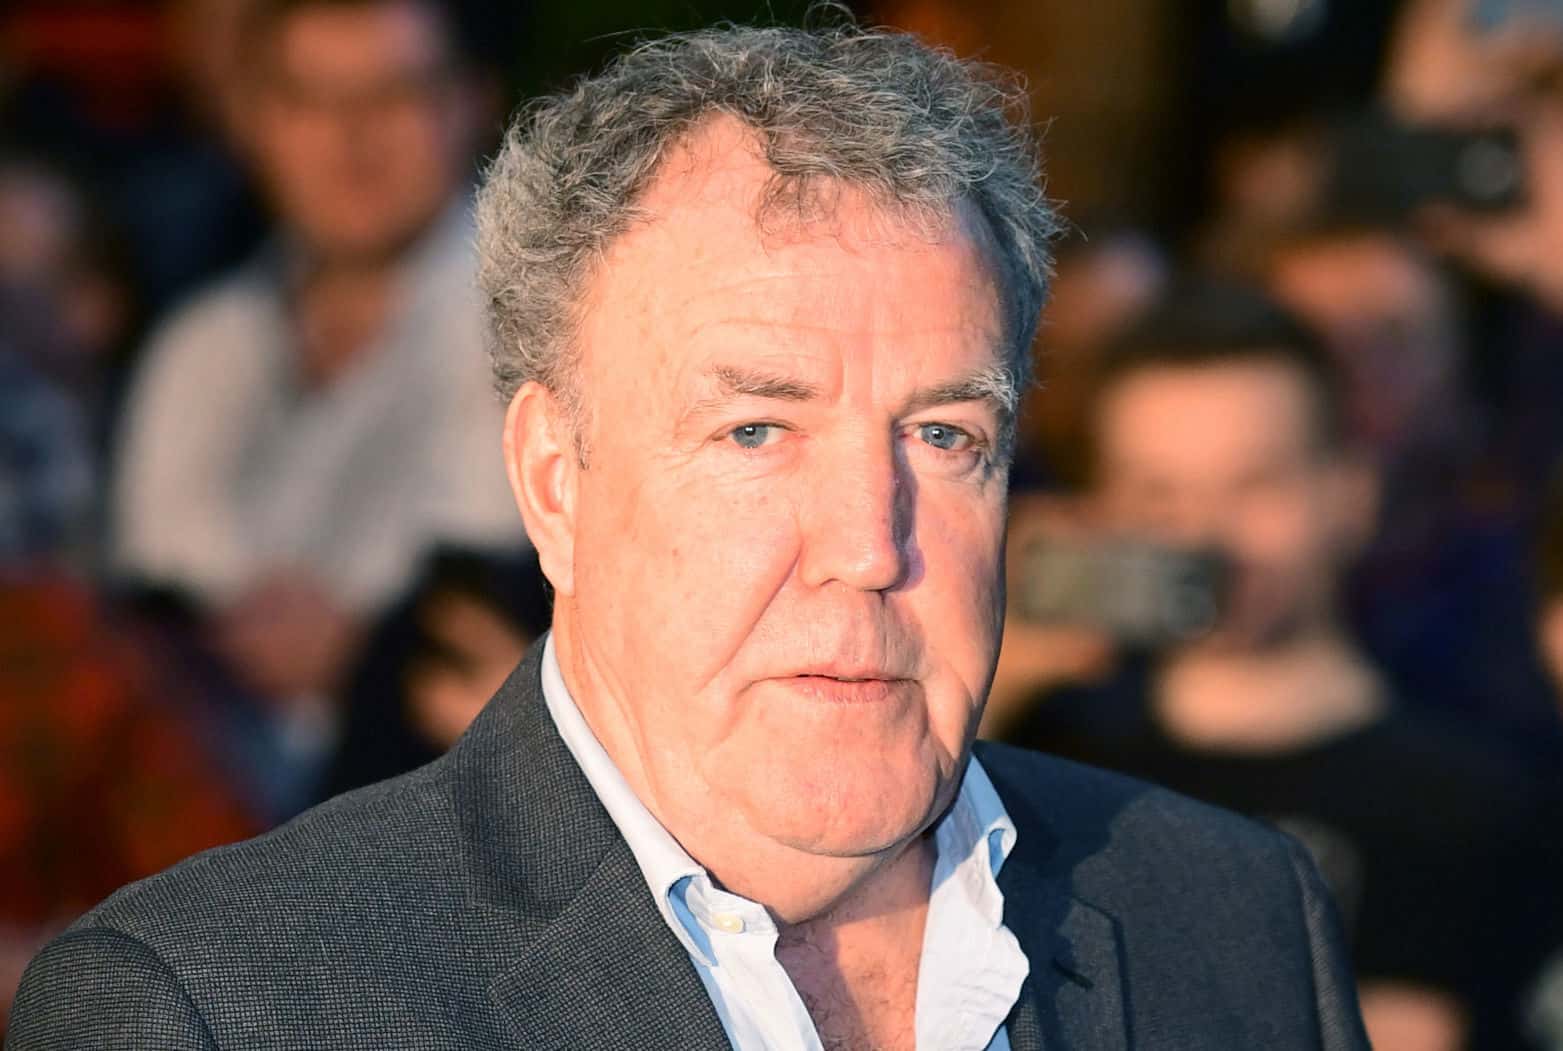 Jeremy Clarkson says cancelling Jimmy Carr ‘would be the sickest joke’